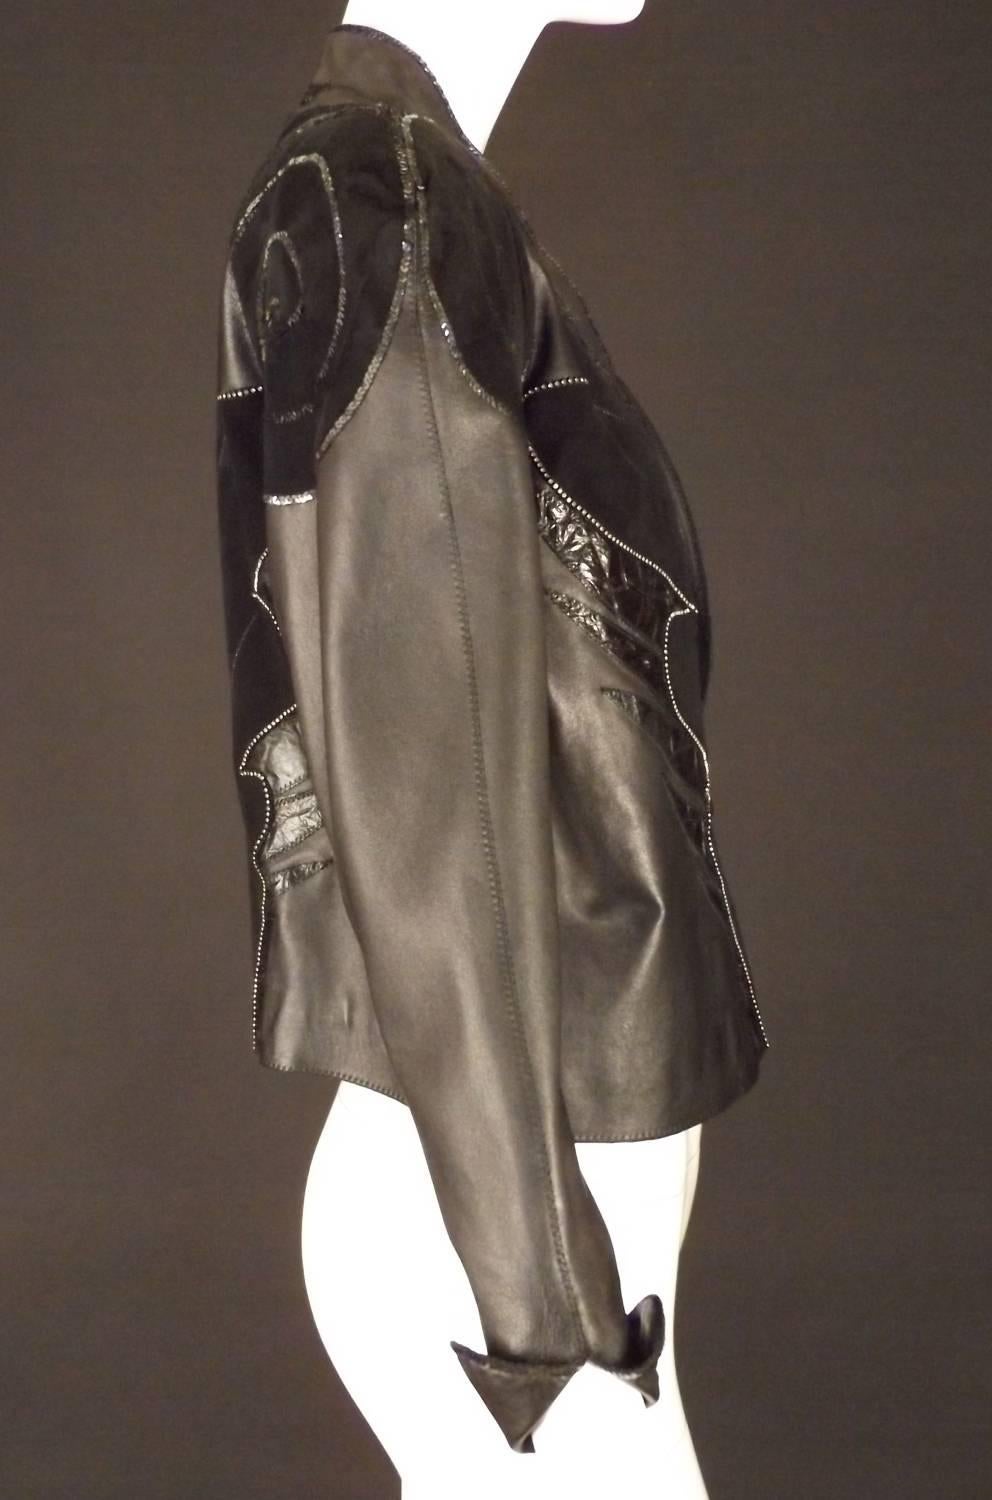 Awesome 1980s oversized jacket in black leather. Fluted shawl collar with a single button and loop closure at the front waist. Large shoulders and upper sleeves taper to the wrists with turned back cuffs. The jacket is adorned in appliqués of black